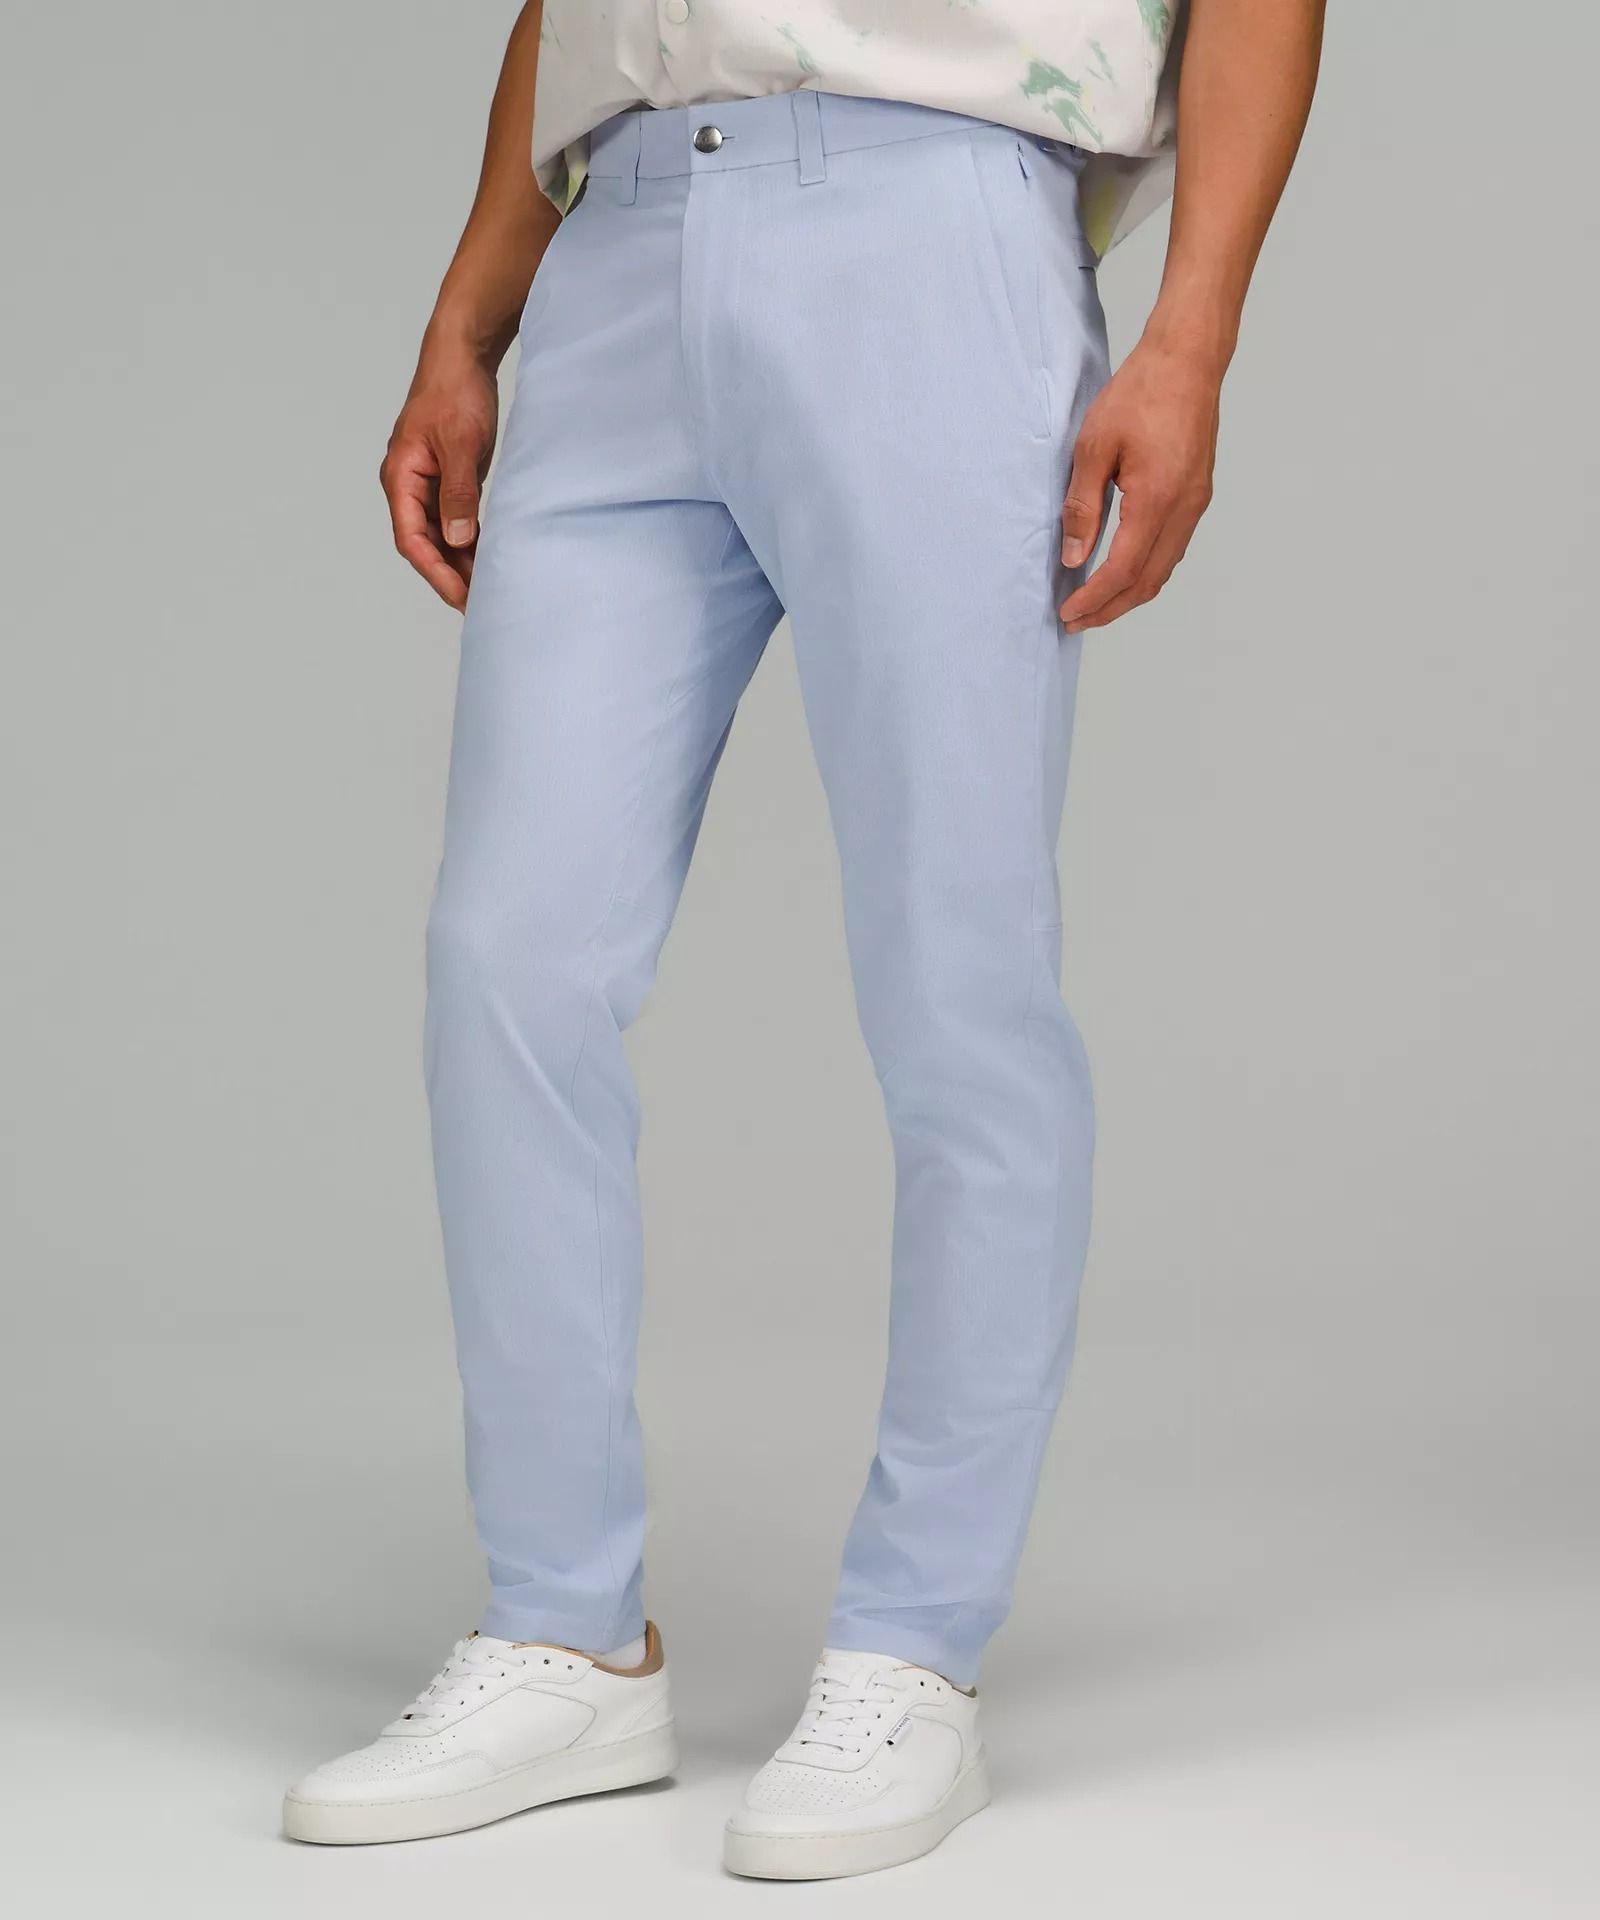 Why lululemon Mens Pants are Fan Favorites  PureWow